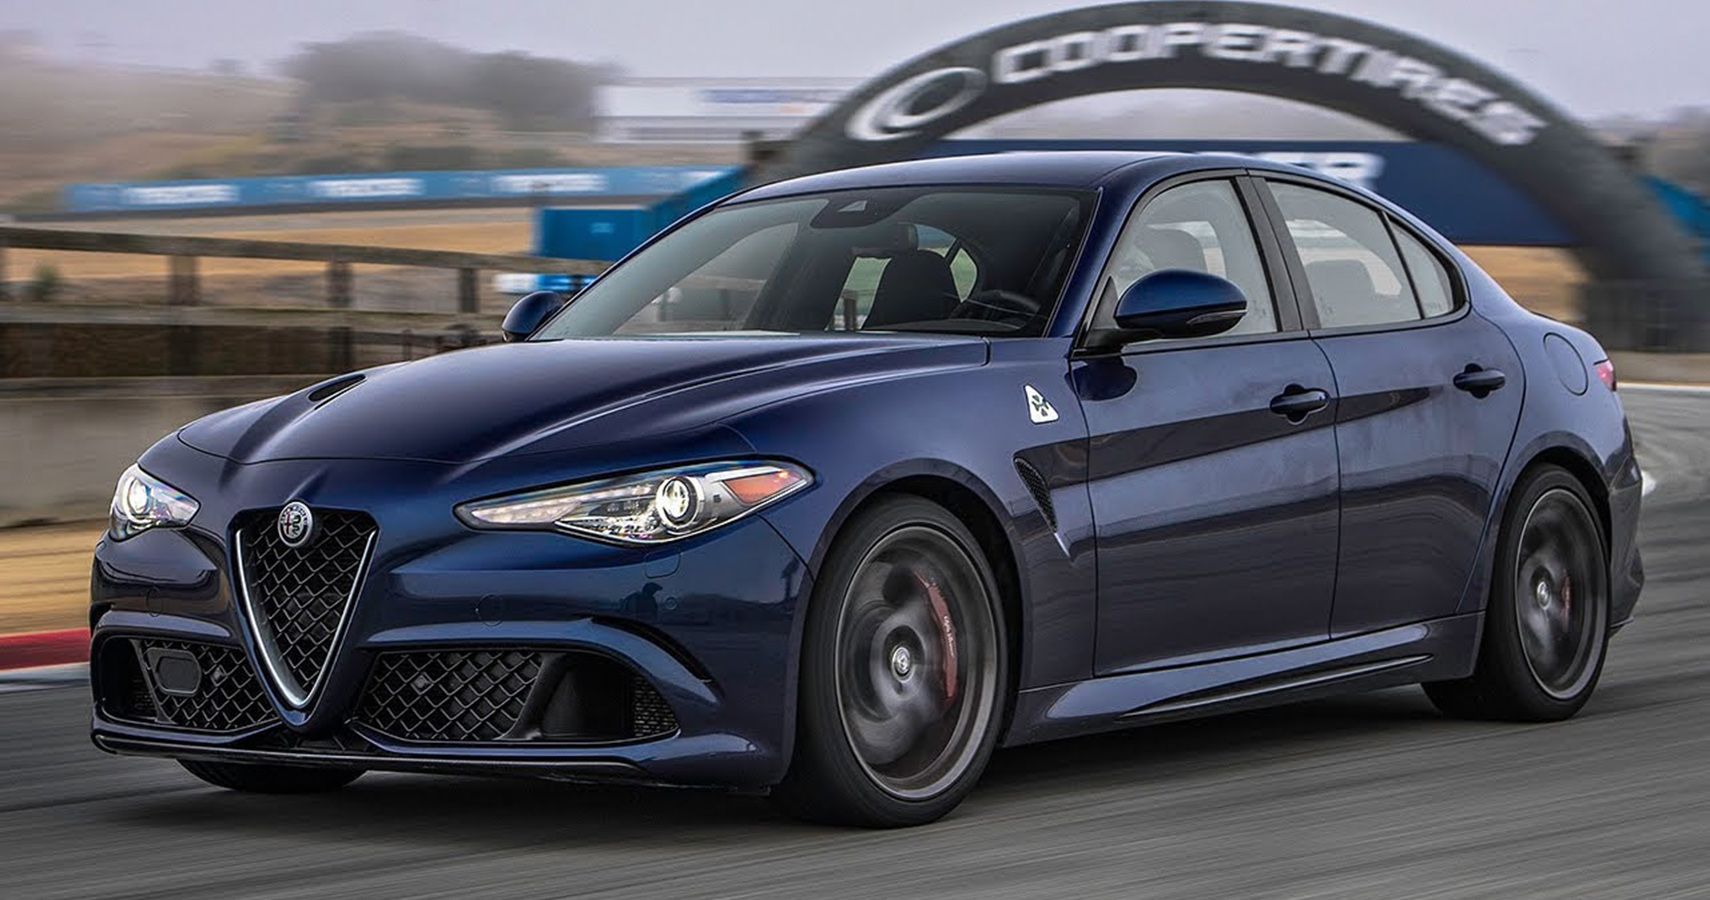 15 Cars With Over 500 Horsepower You Can Buy For Under $50,000